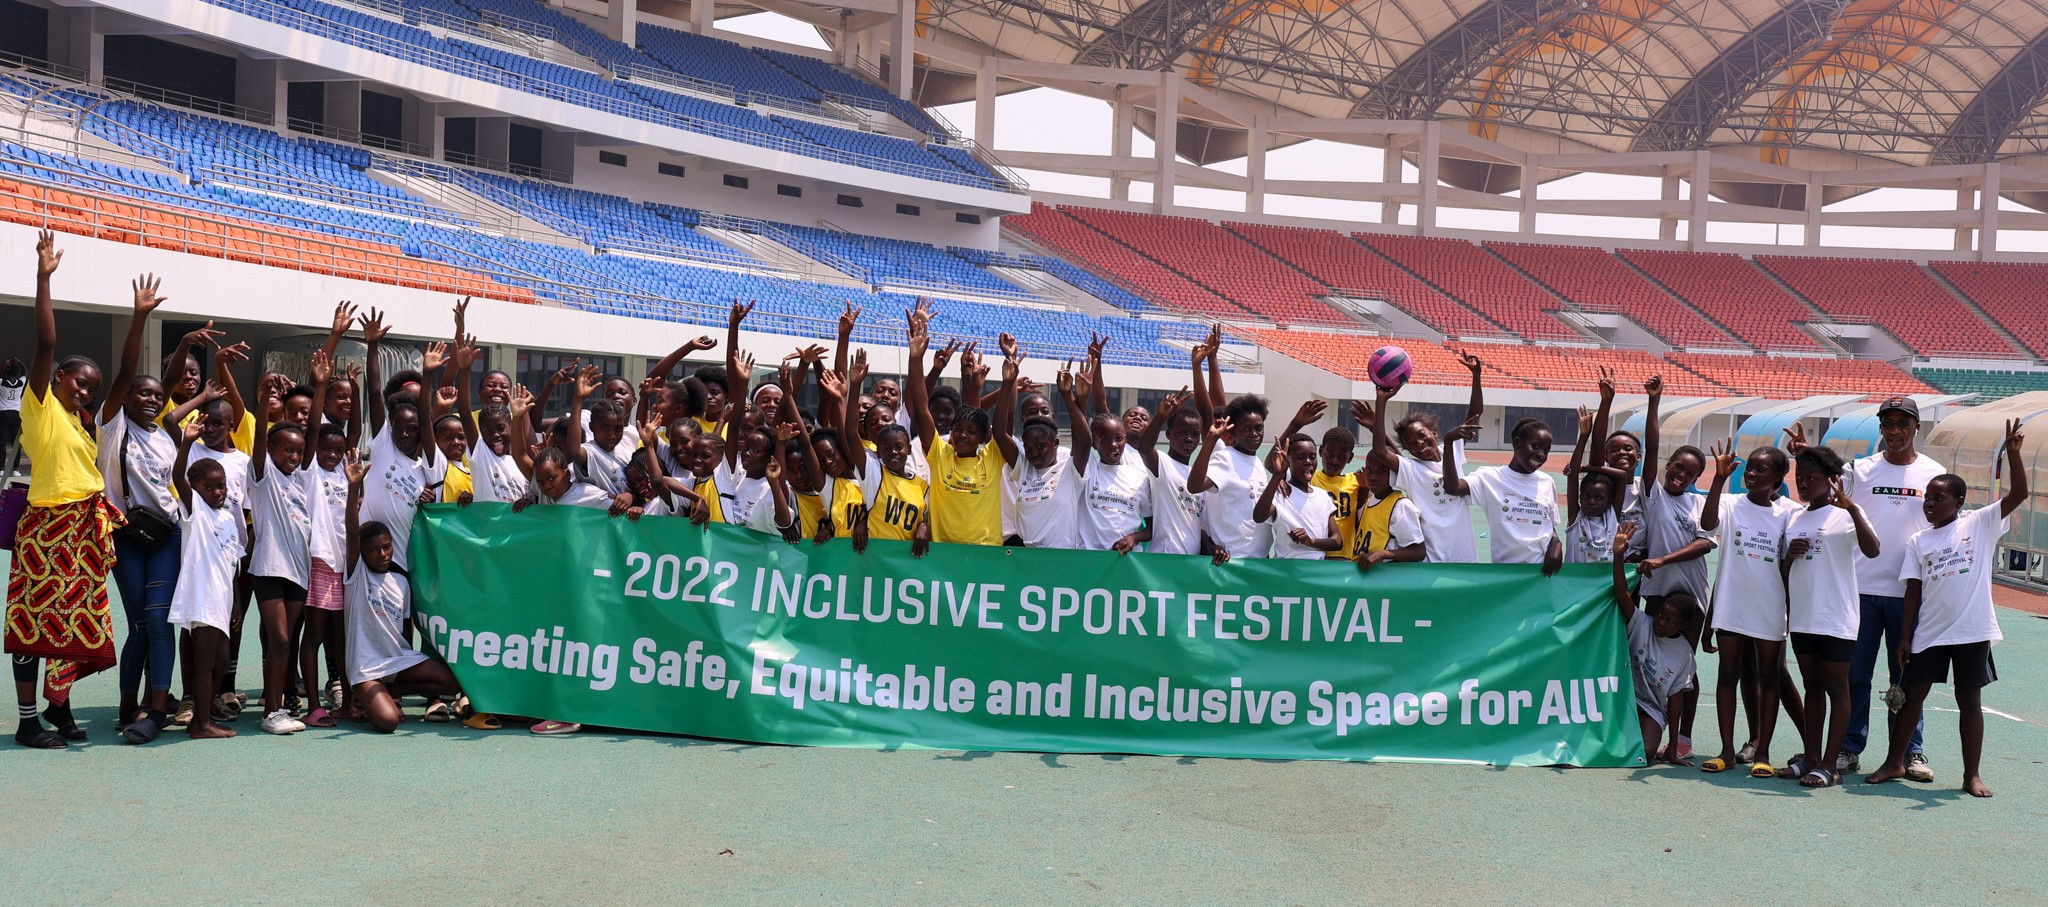 The National Heroes Stadium in Lusaka was the venue for the Inclusive Sports Festival ©NOCZ